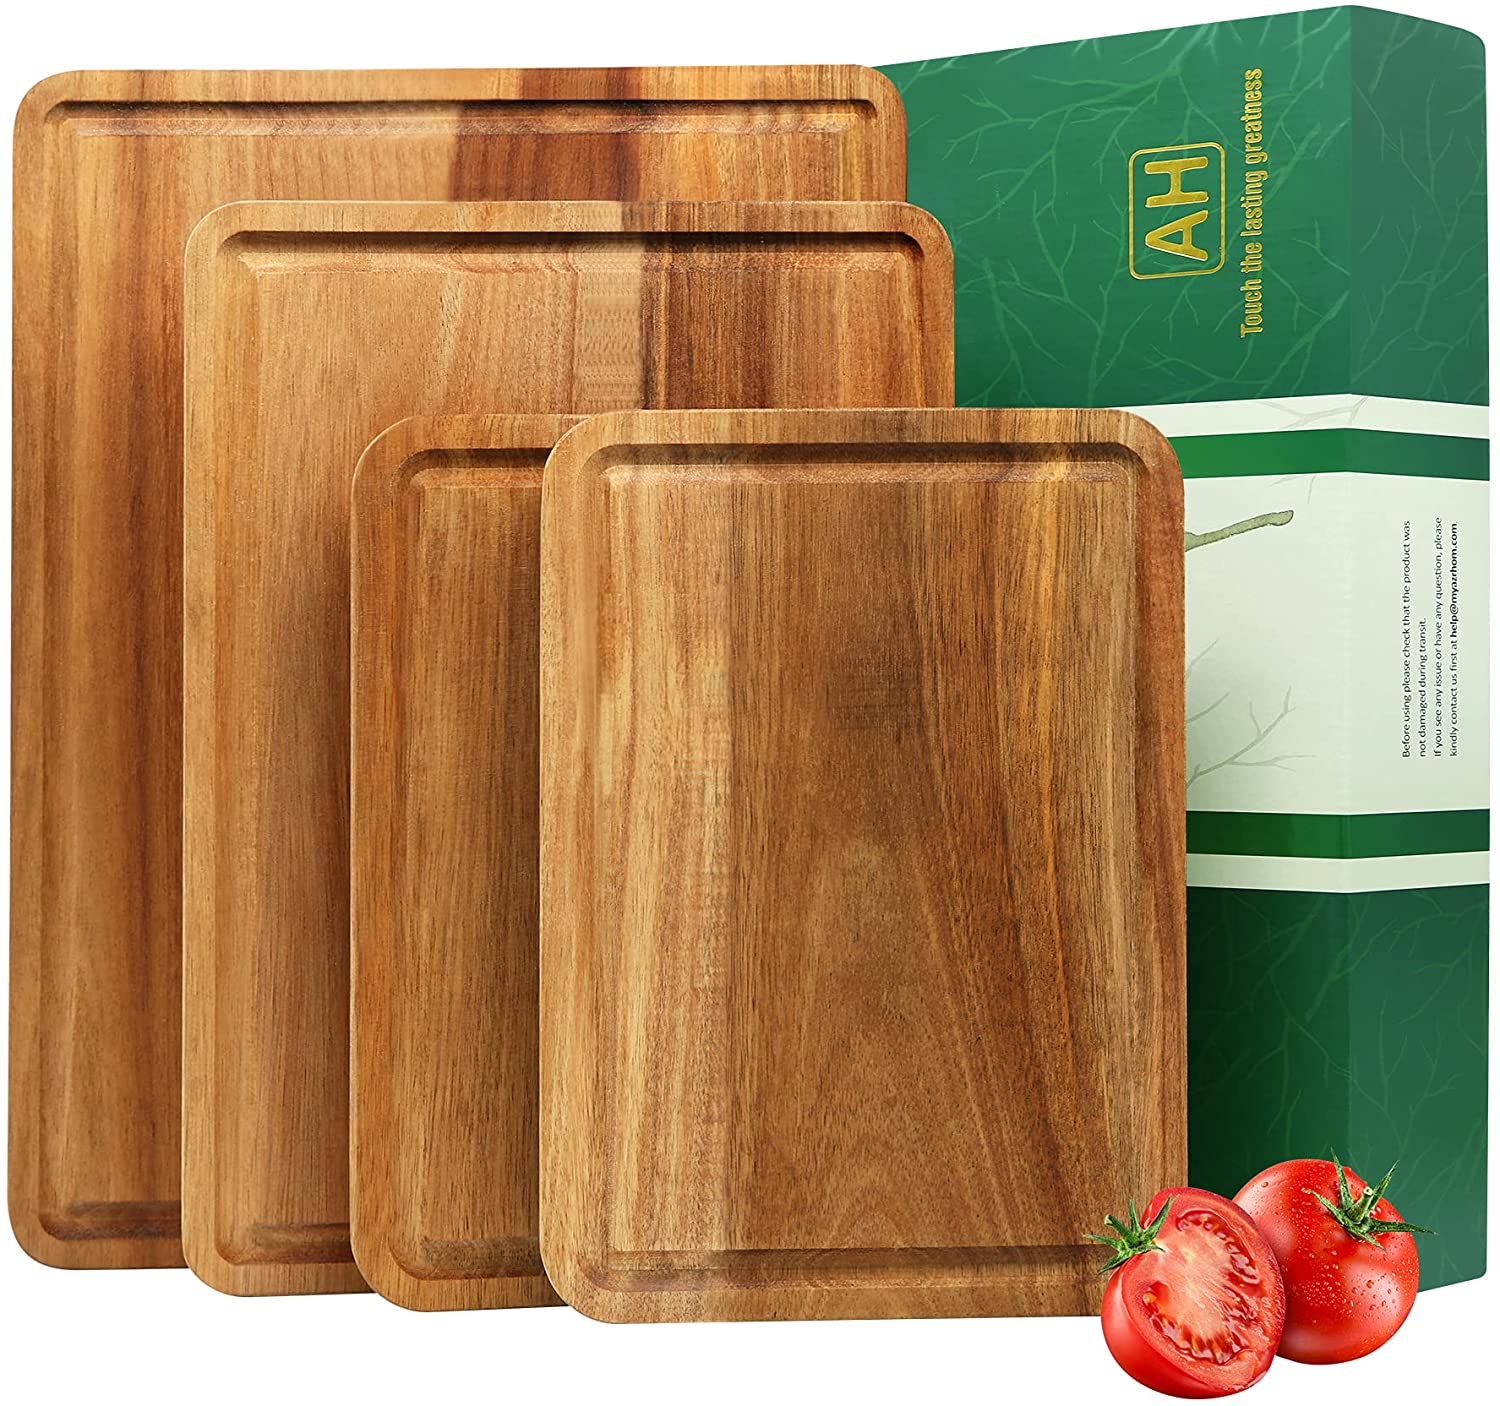 Multipurpose Reversible with Carved Handles Juice Groove & Cracker Holder Large 16x12x1.5 incl Gift Box with Cutting Board Seasoning Oil x 2 & Cloth by MINTAIN Premium Acacia Wood Cutting Board